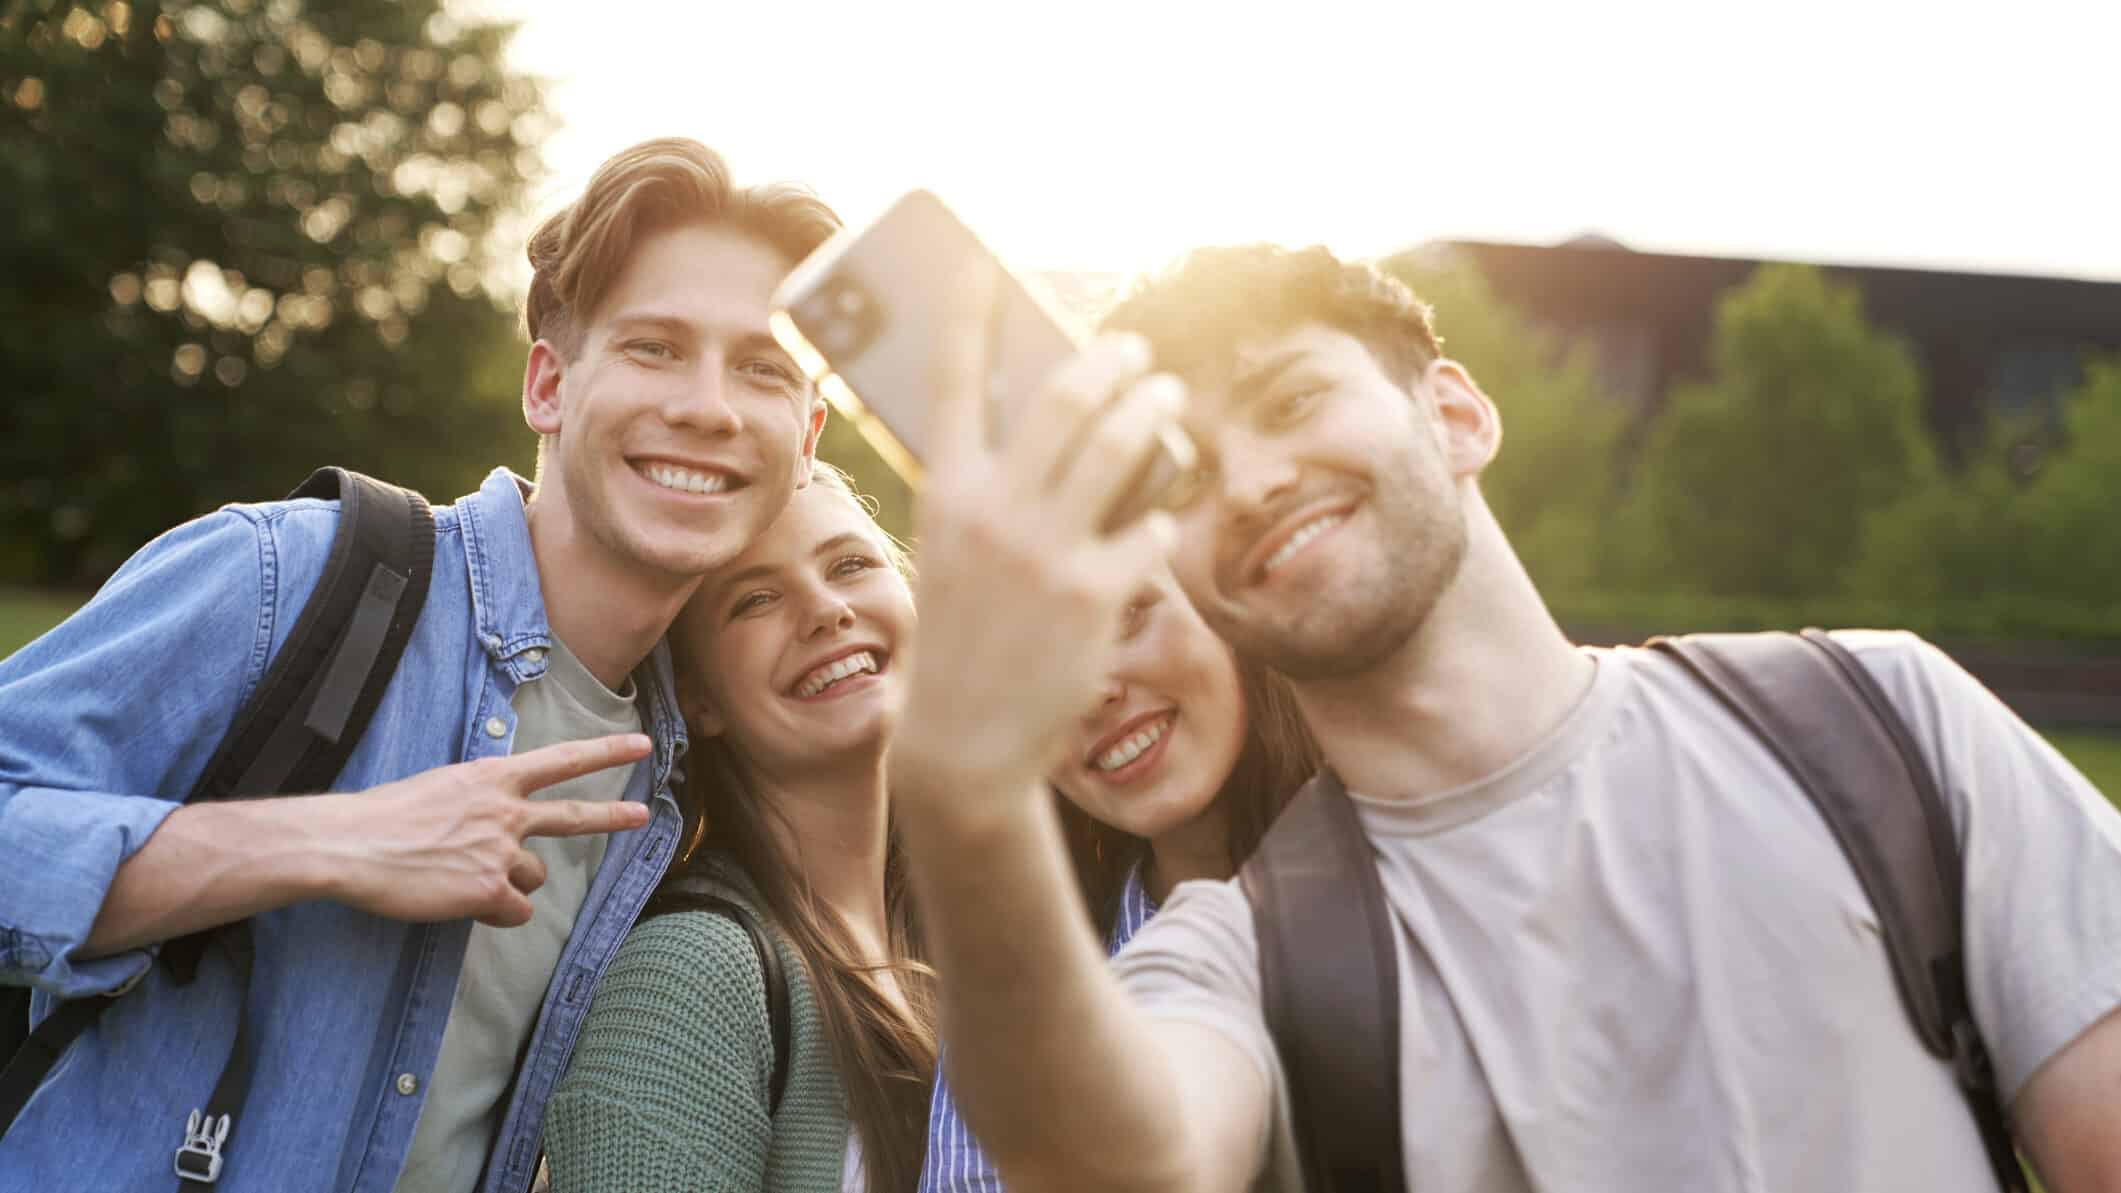 Group of caucasian students taking selfie outside the university campus